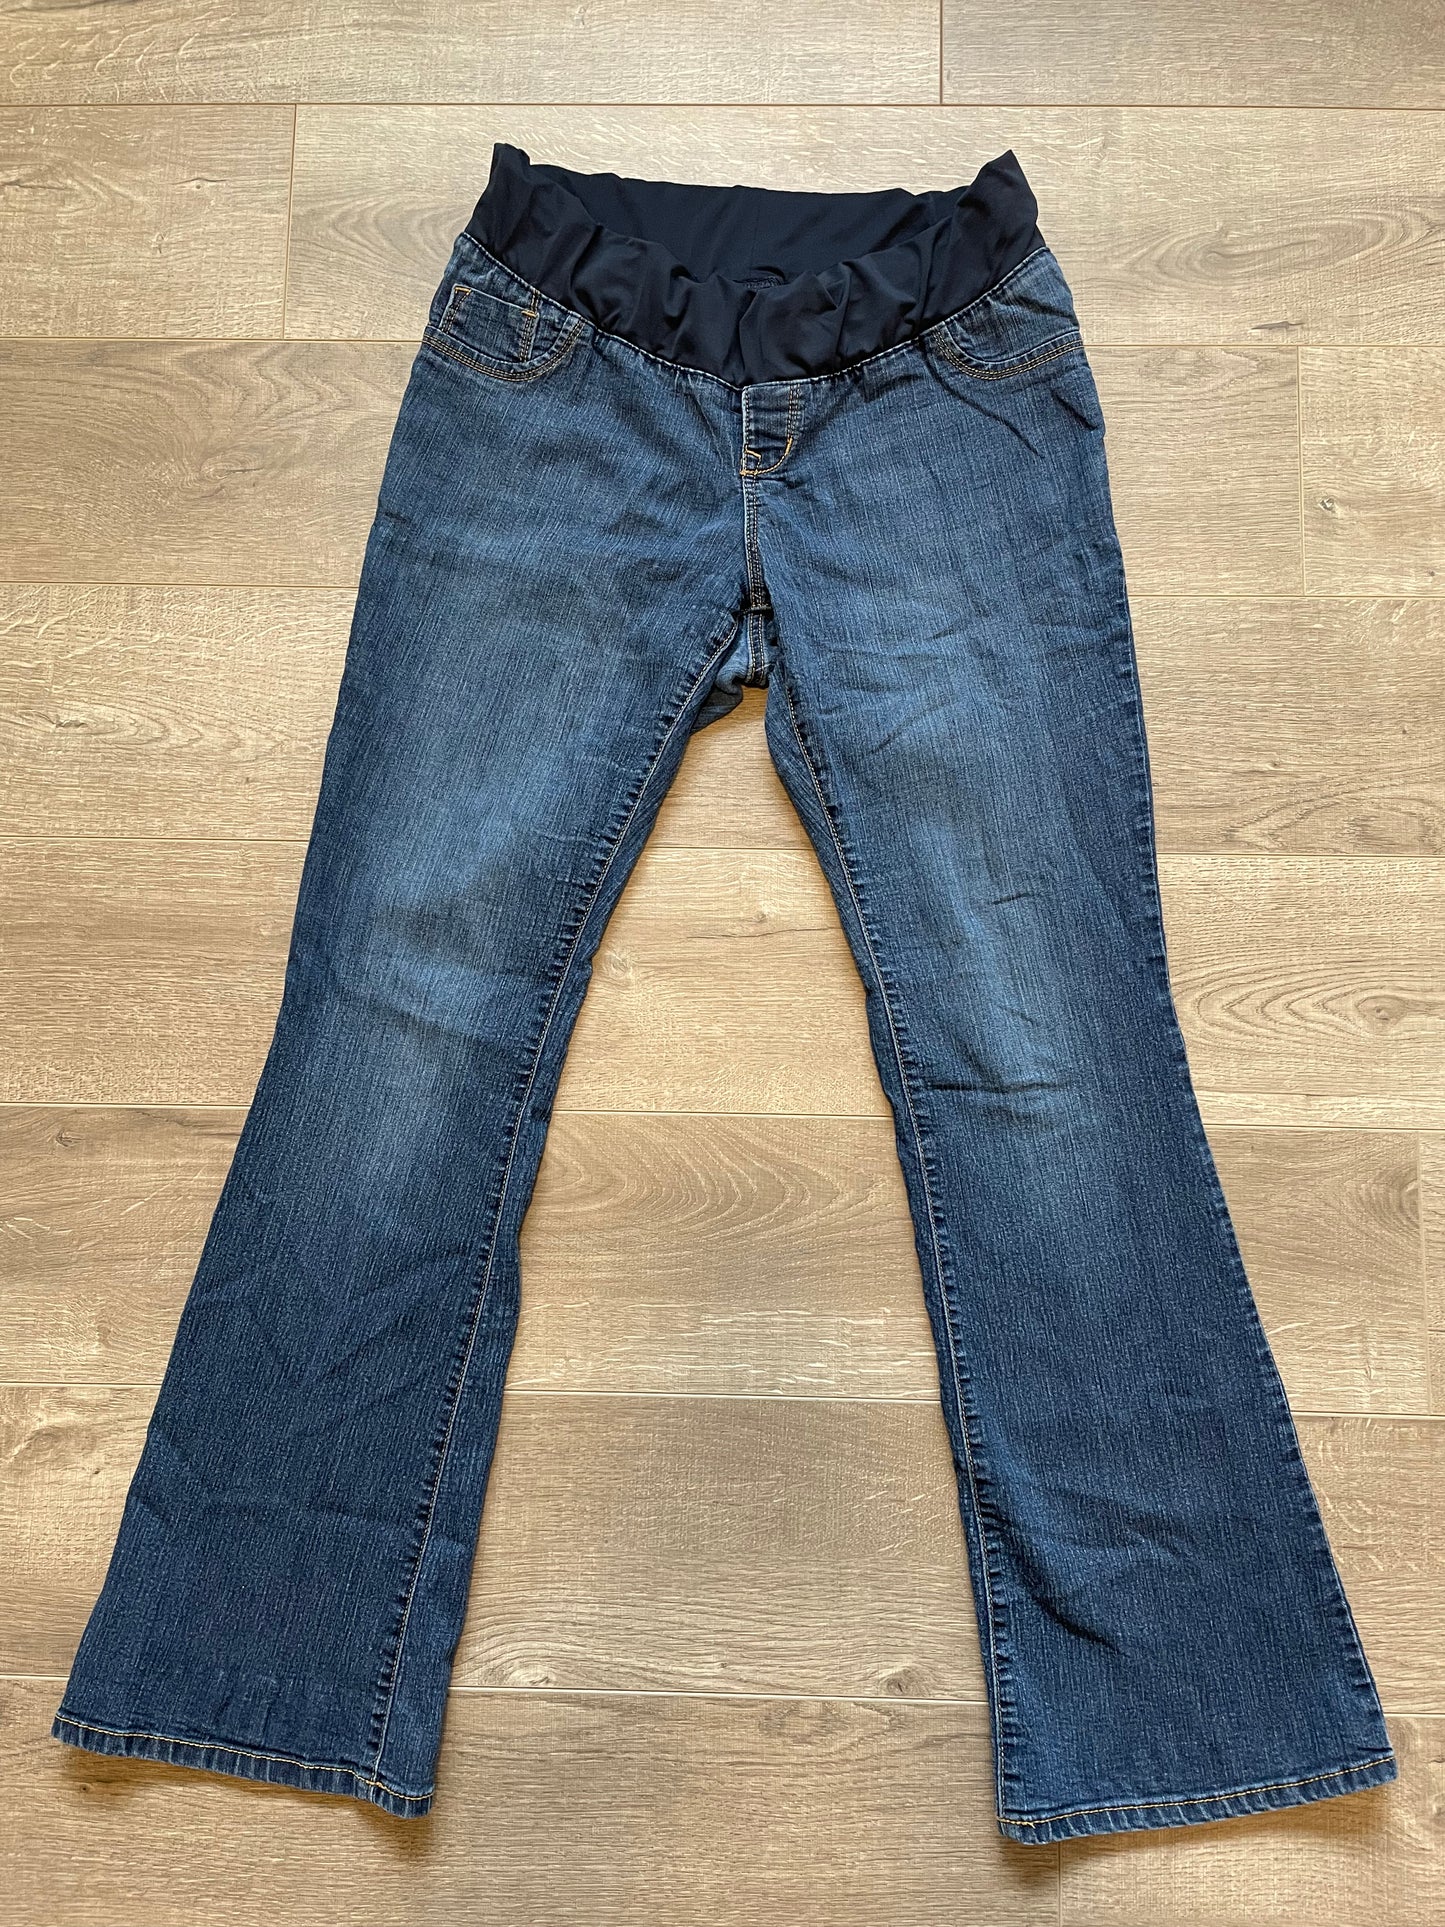 Boot-Cut Maternity Jeans / size 10